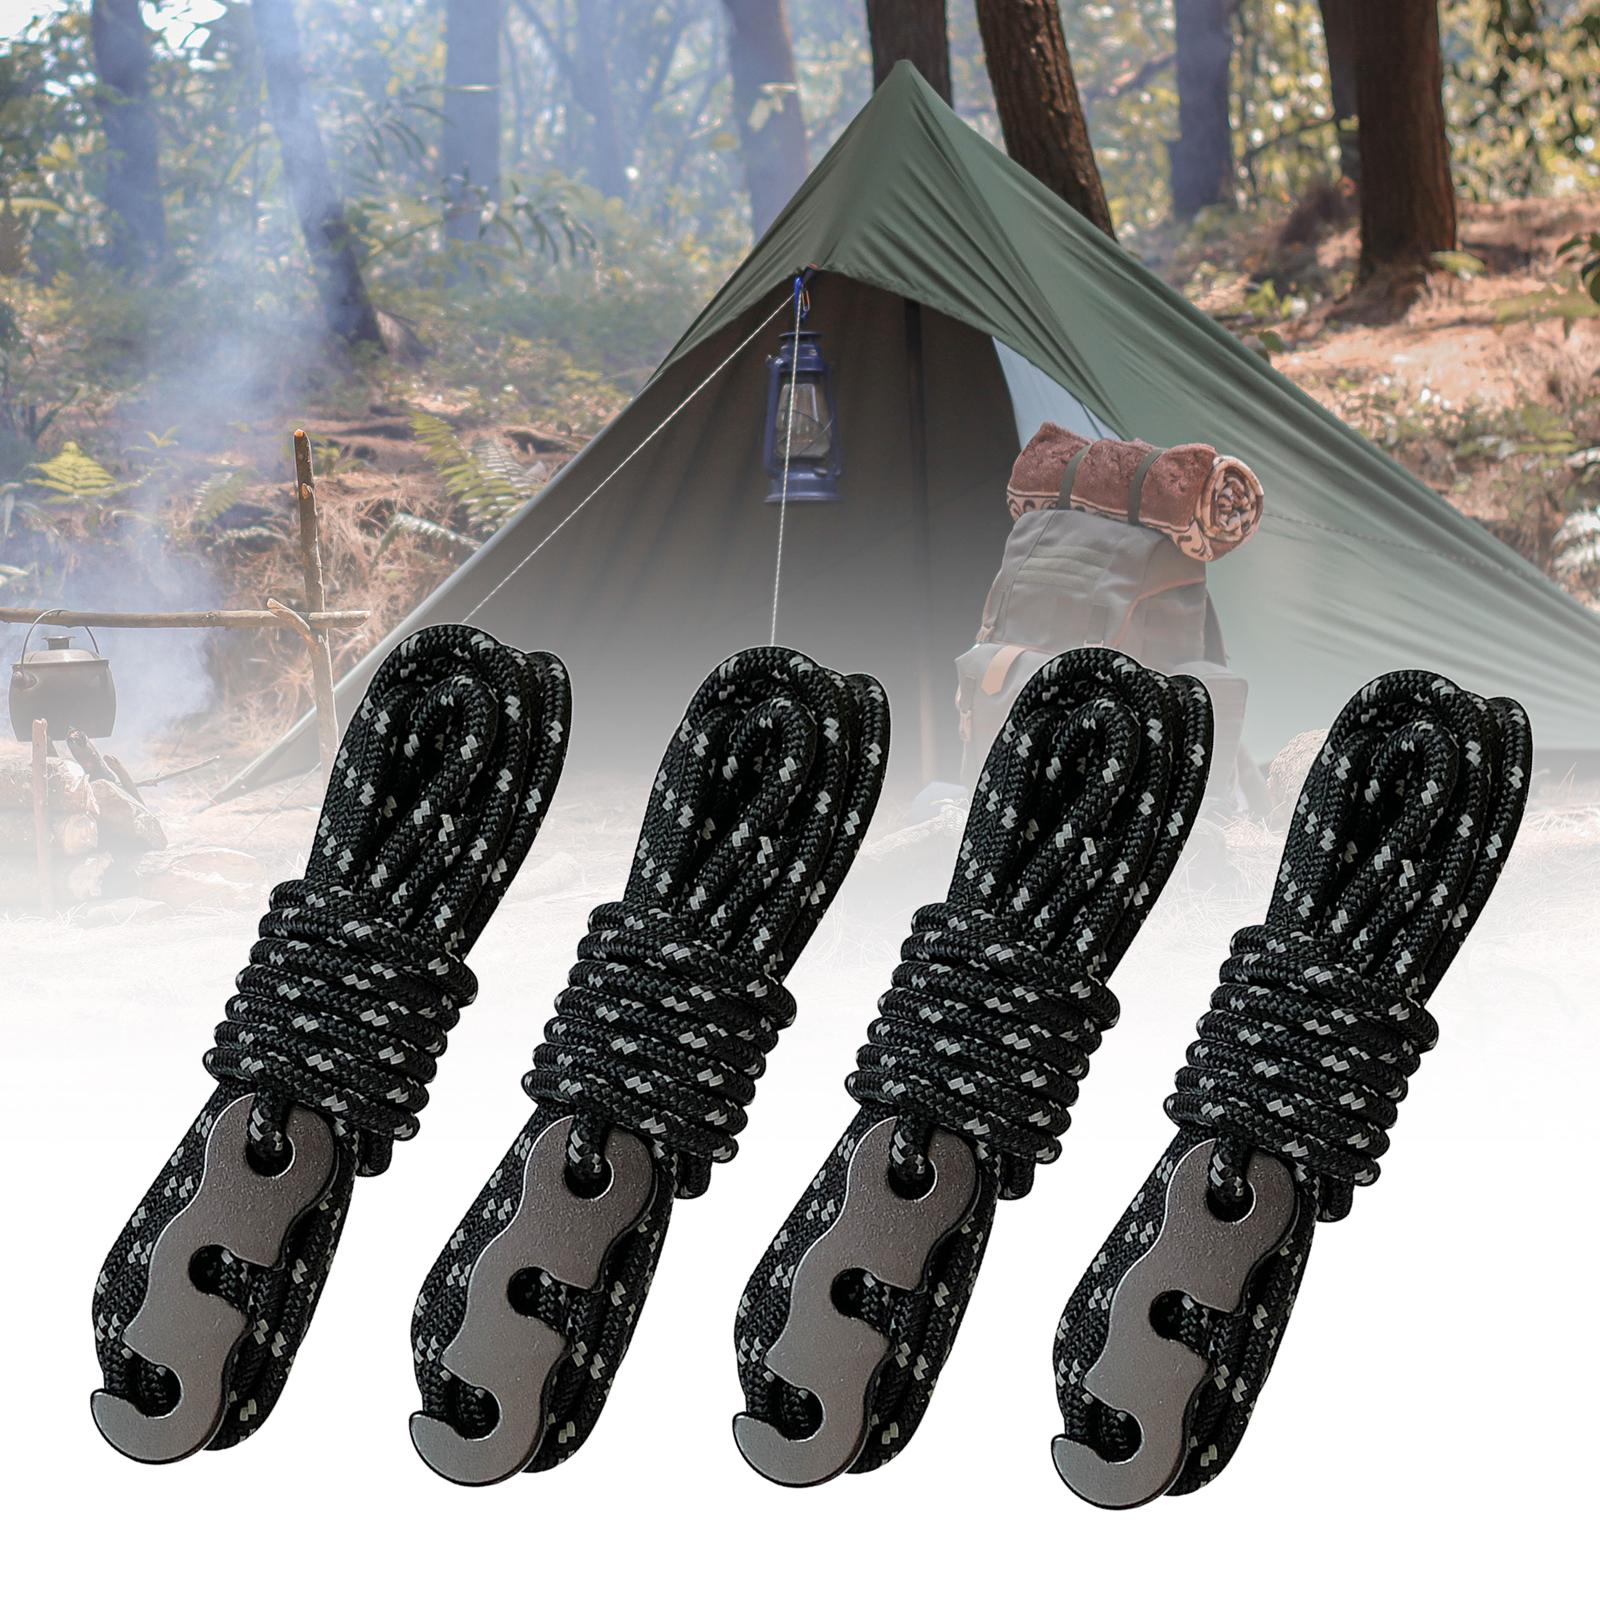 4x Camping Tent Cords Hiking Picnic Survival Gear Activity Outdoor Guy Lines Black